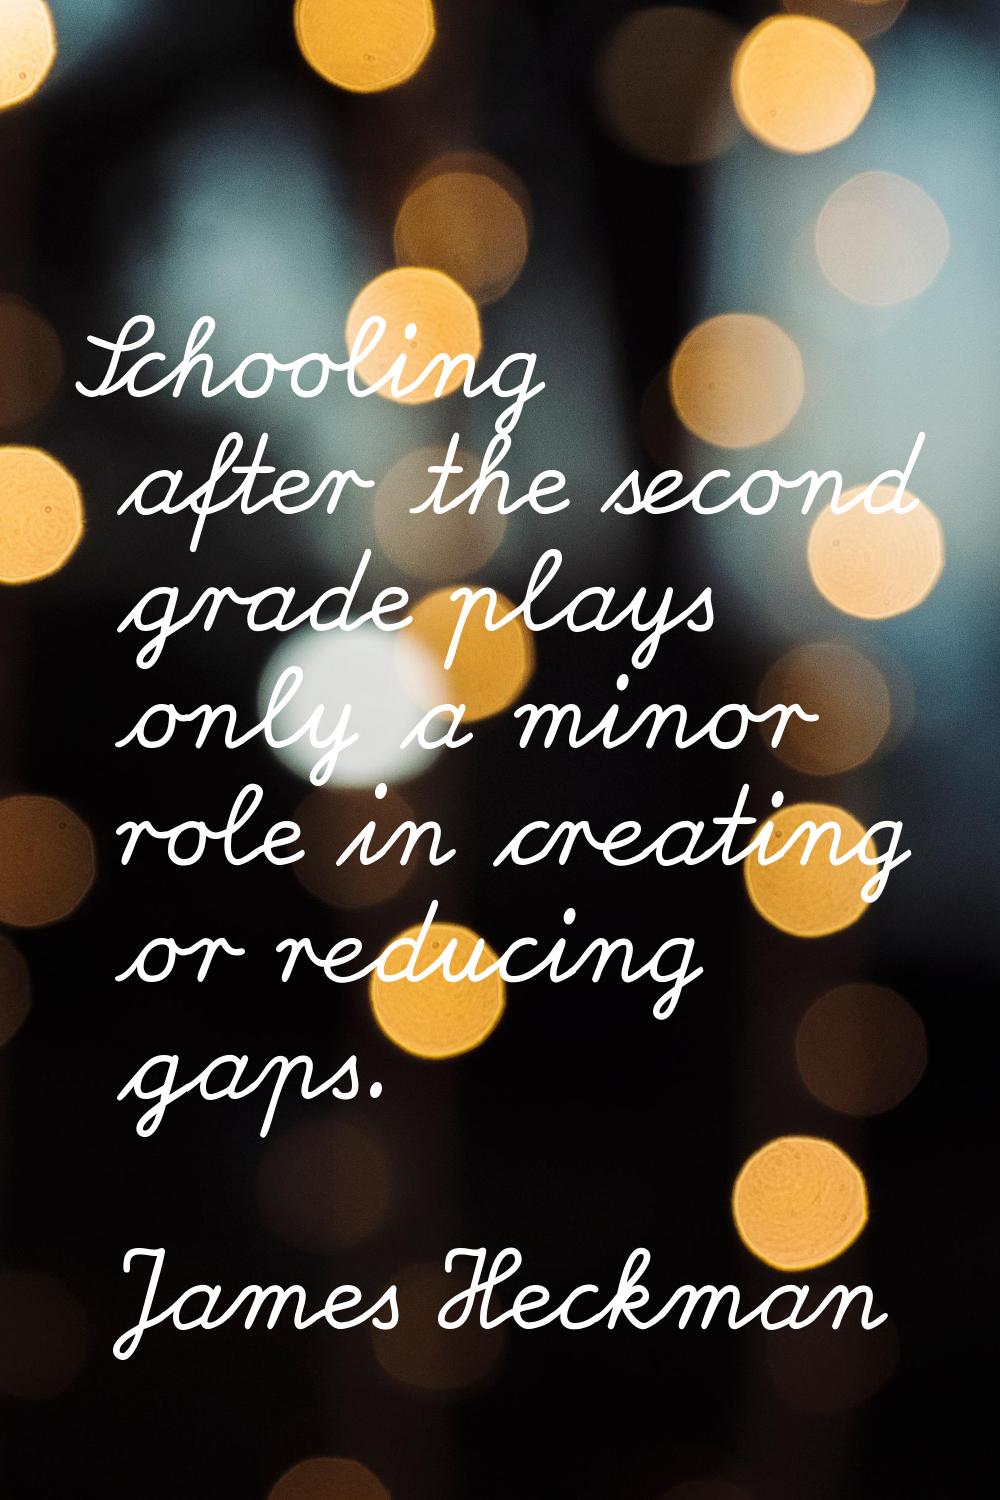 Schooling after the second grade plays only a minor role in creating or reducing gaps.